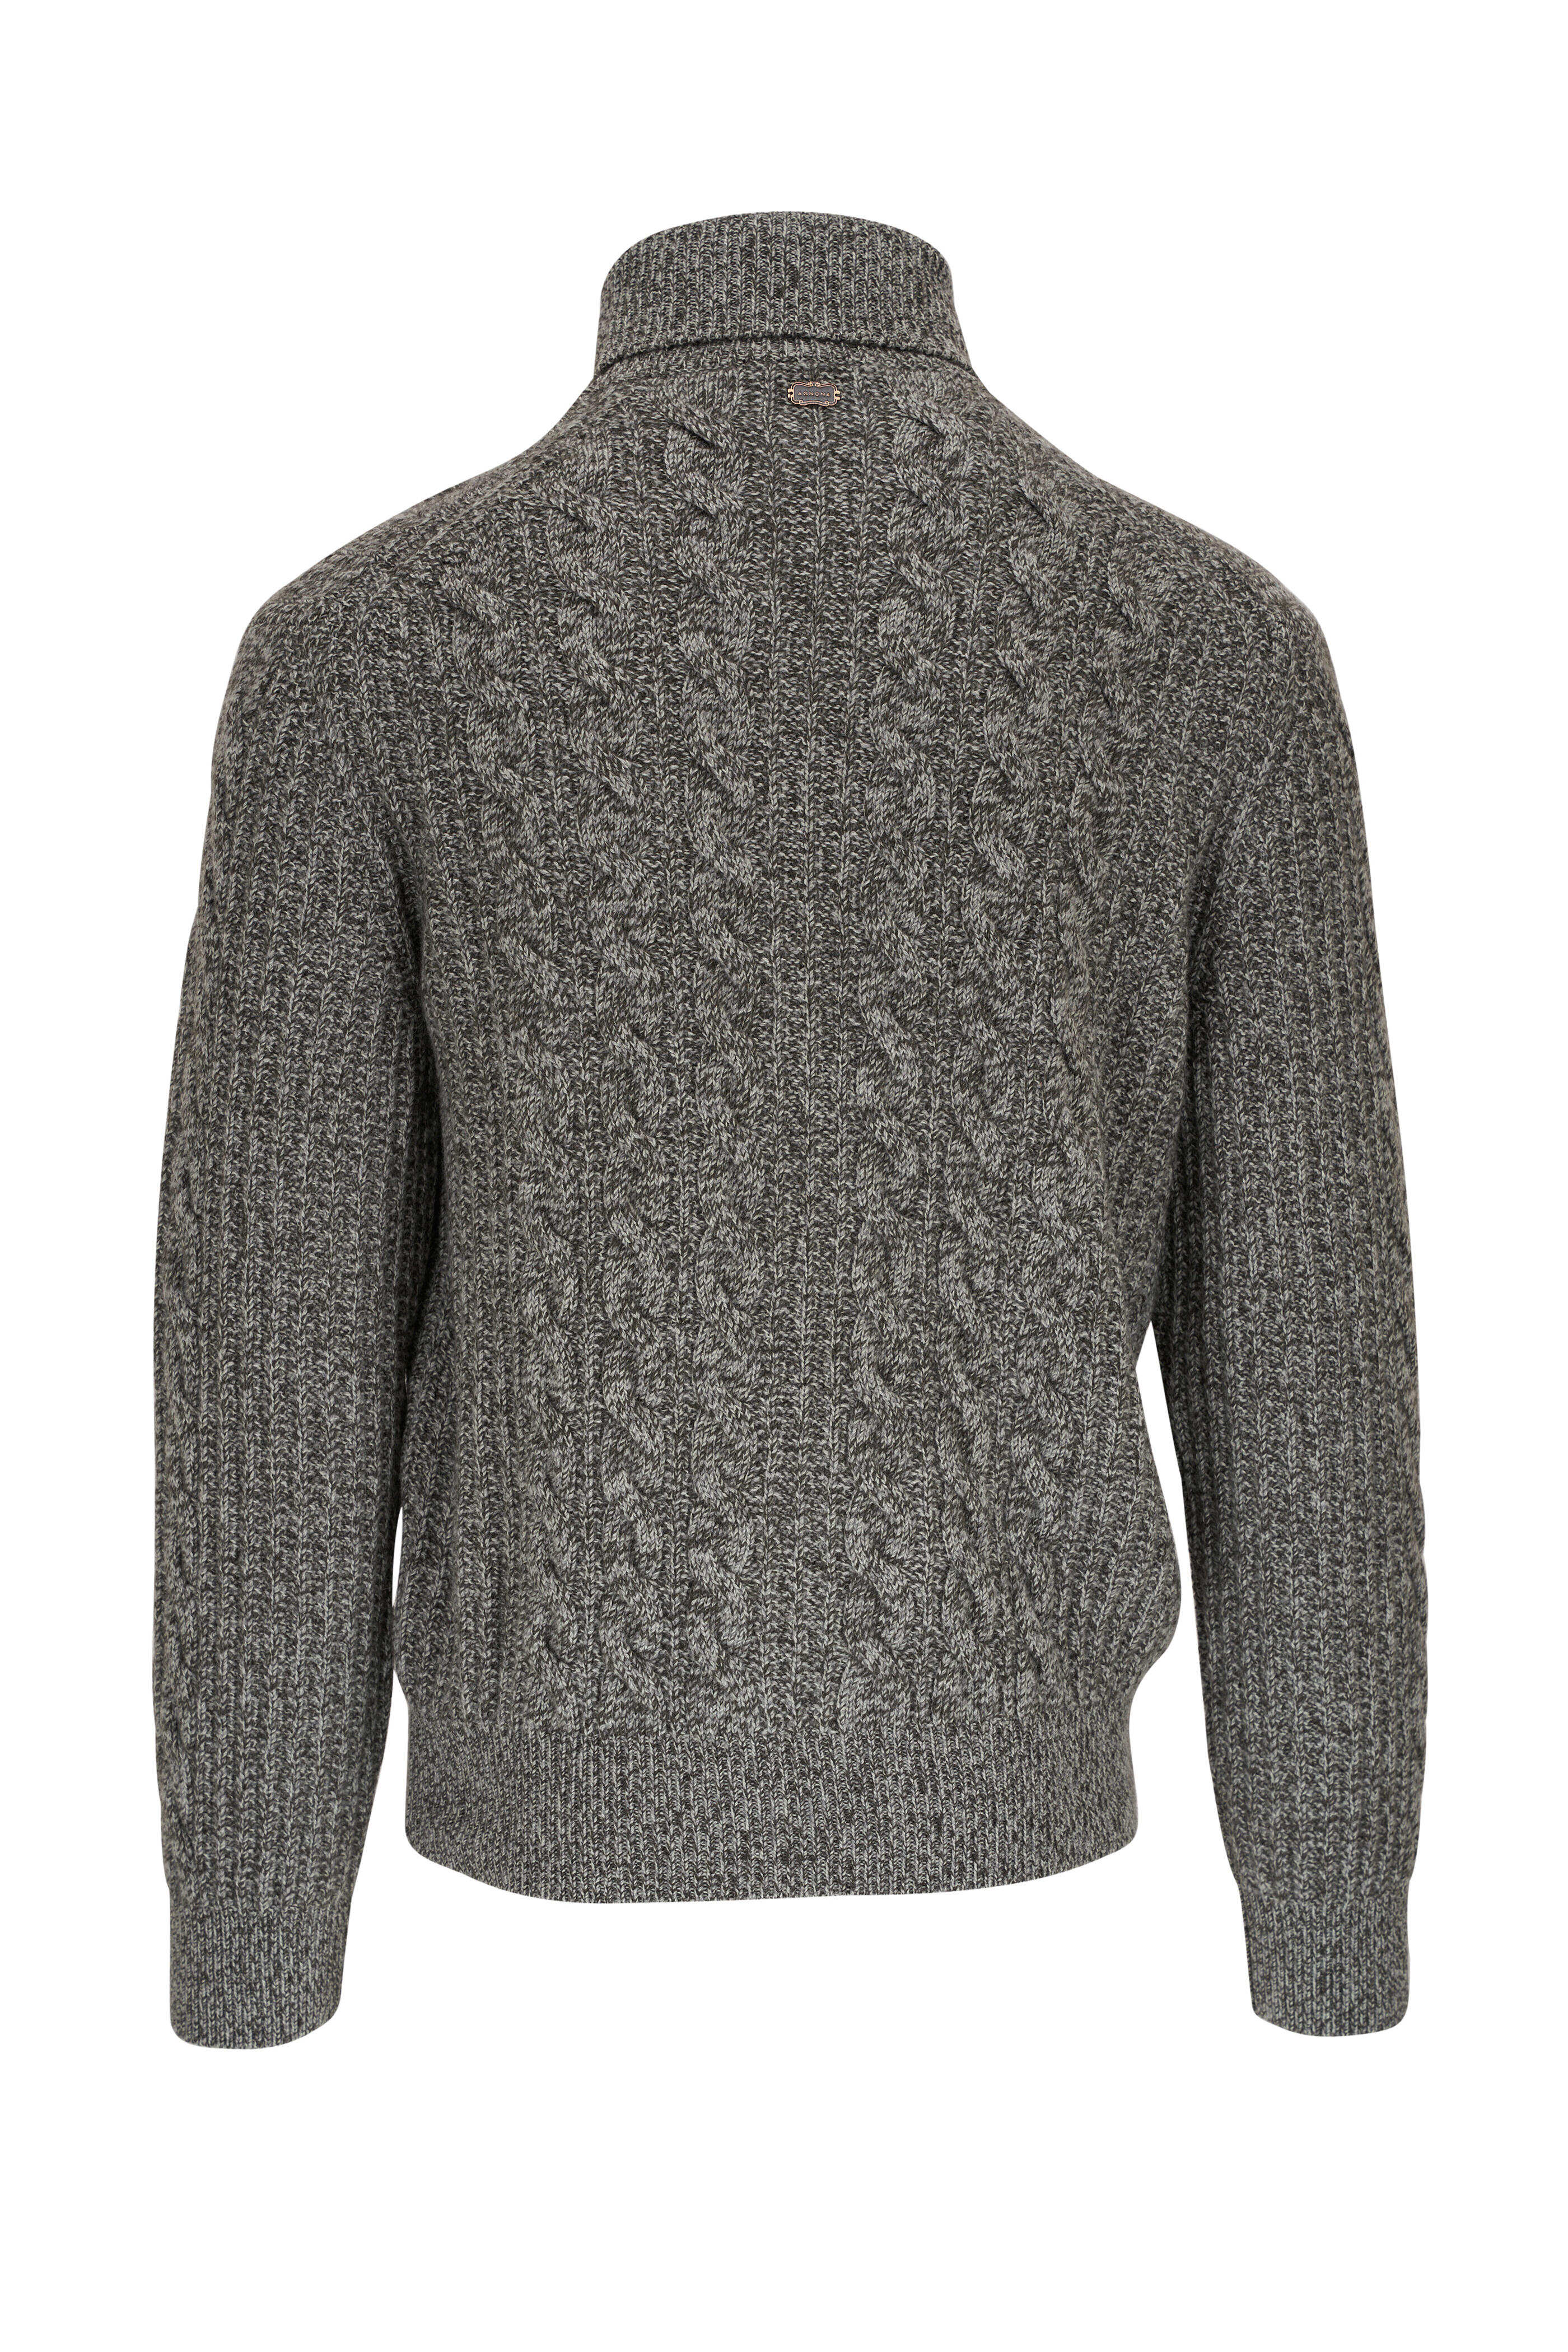 Agnona - Olive & Gray Cable Knit Turtleneck Sweater